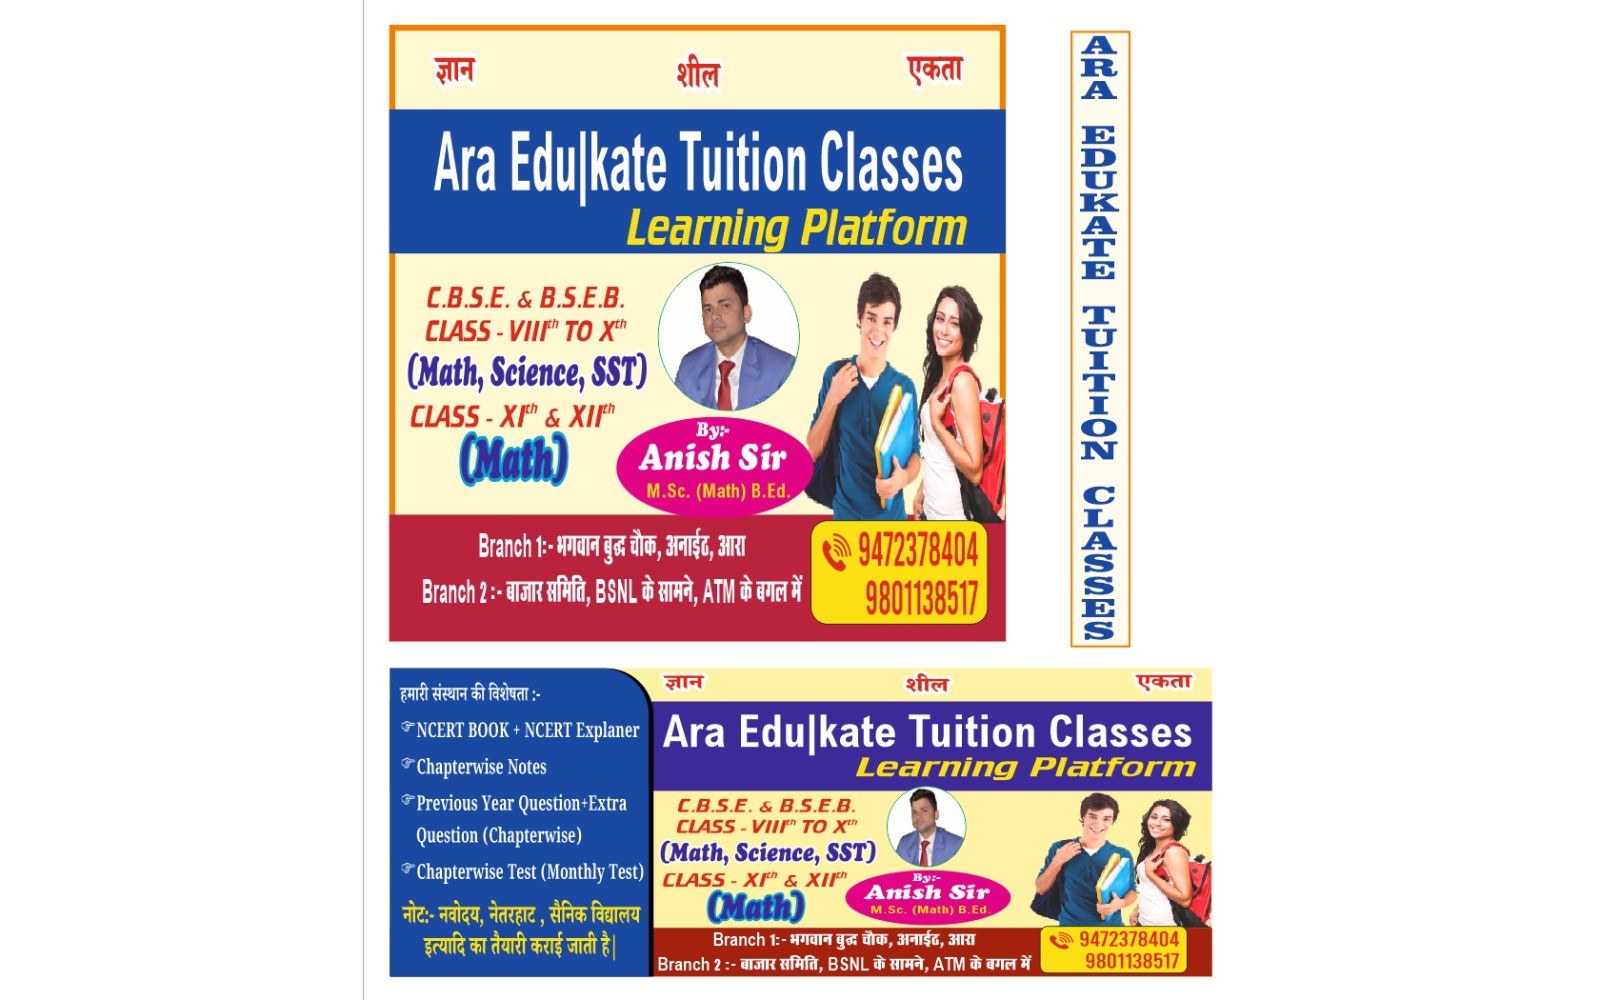 Class 9th/ 10th Tuition, Elementary (Class 1 - 5 Tuition), Middle Class (6th -8th) Tuition; Exp: More than 5 year